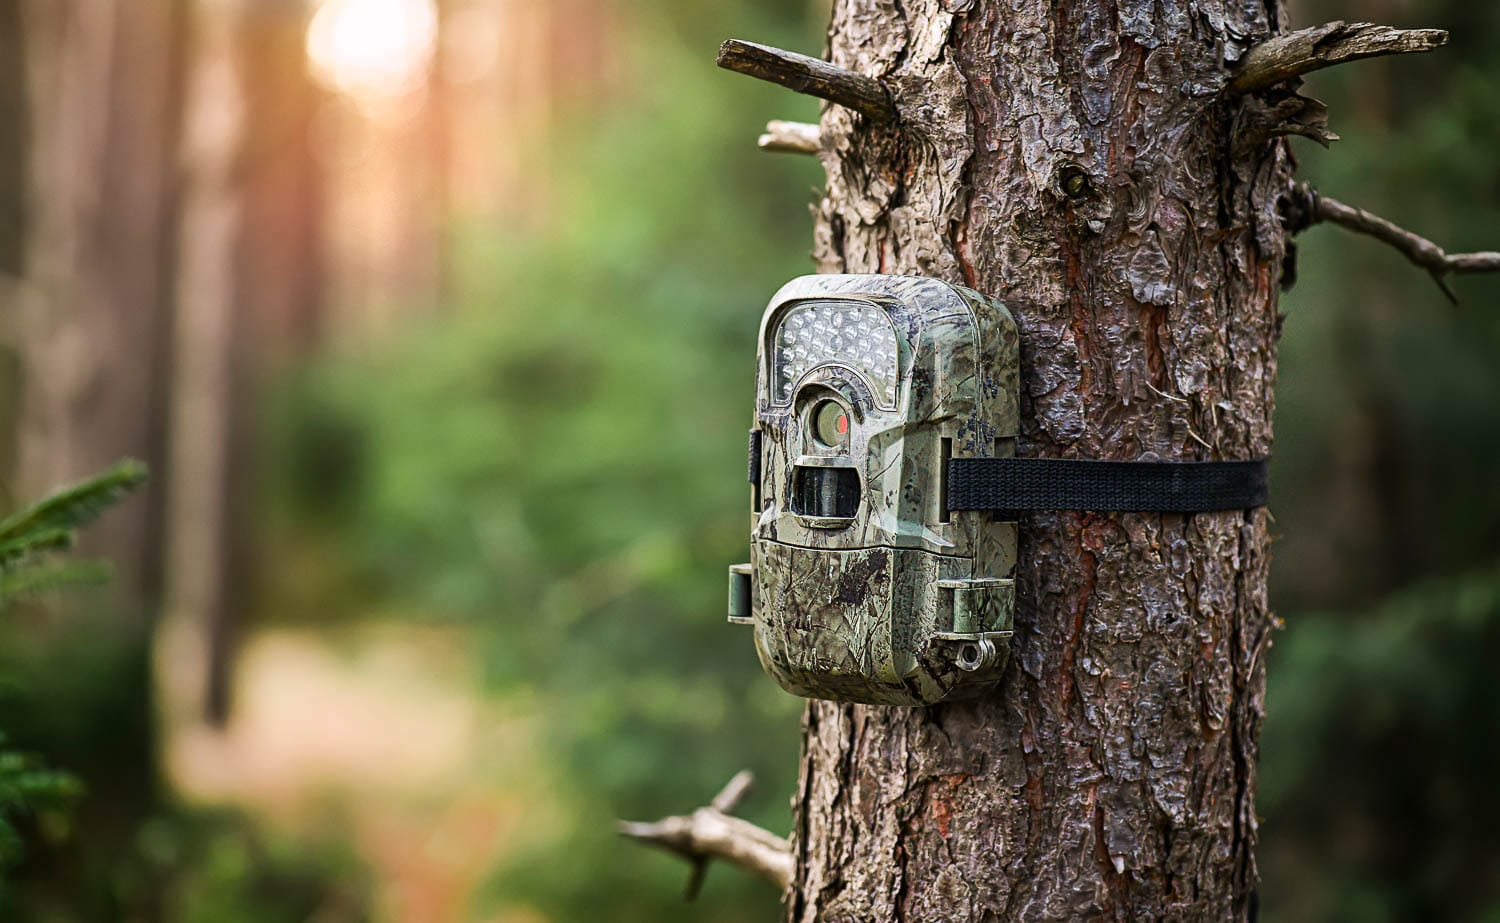 Trail camera attached to a tree in a forest setting.